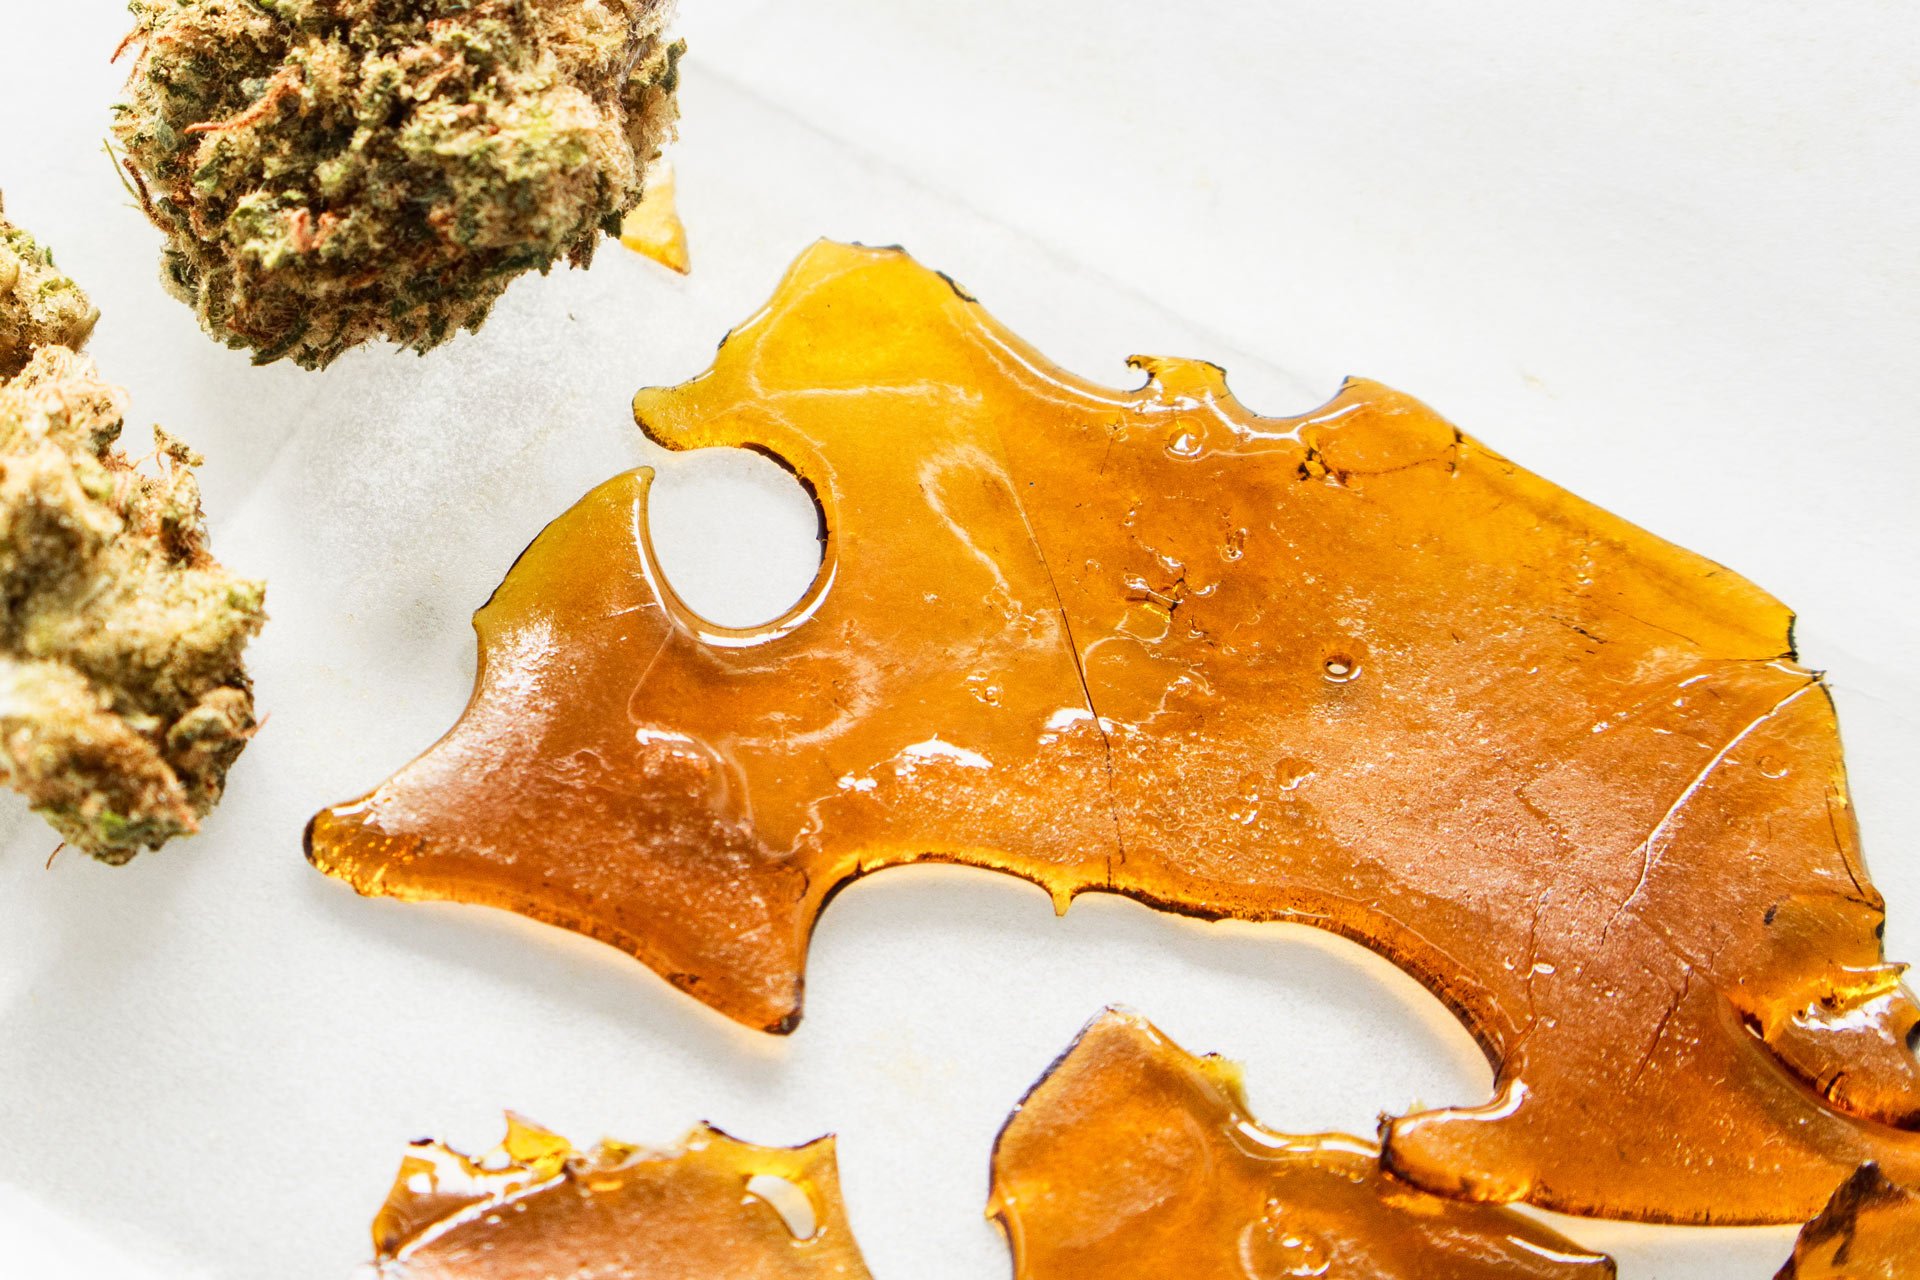 concentrates, thc, cannabis, dabs, wax, badder, shatter, thc diamonds, resin, rosin